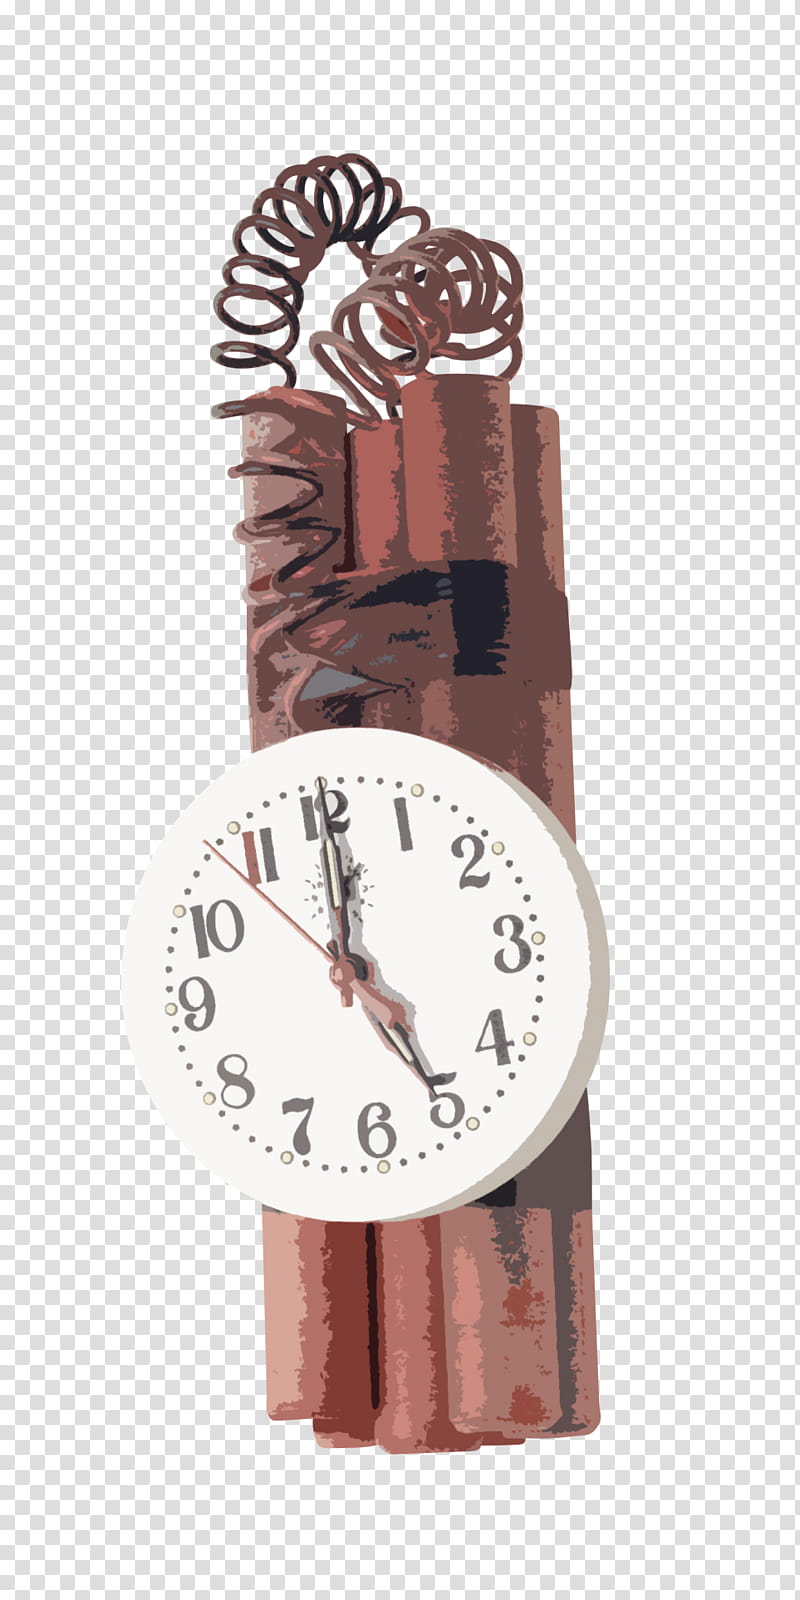 Fashion Icon, Time Bomb, Explosion, Ticking Time Bomb Scenario, Icon Design, Clock, Wall Clock, Analog Watch transparent background PNG clipart